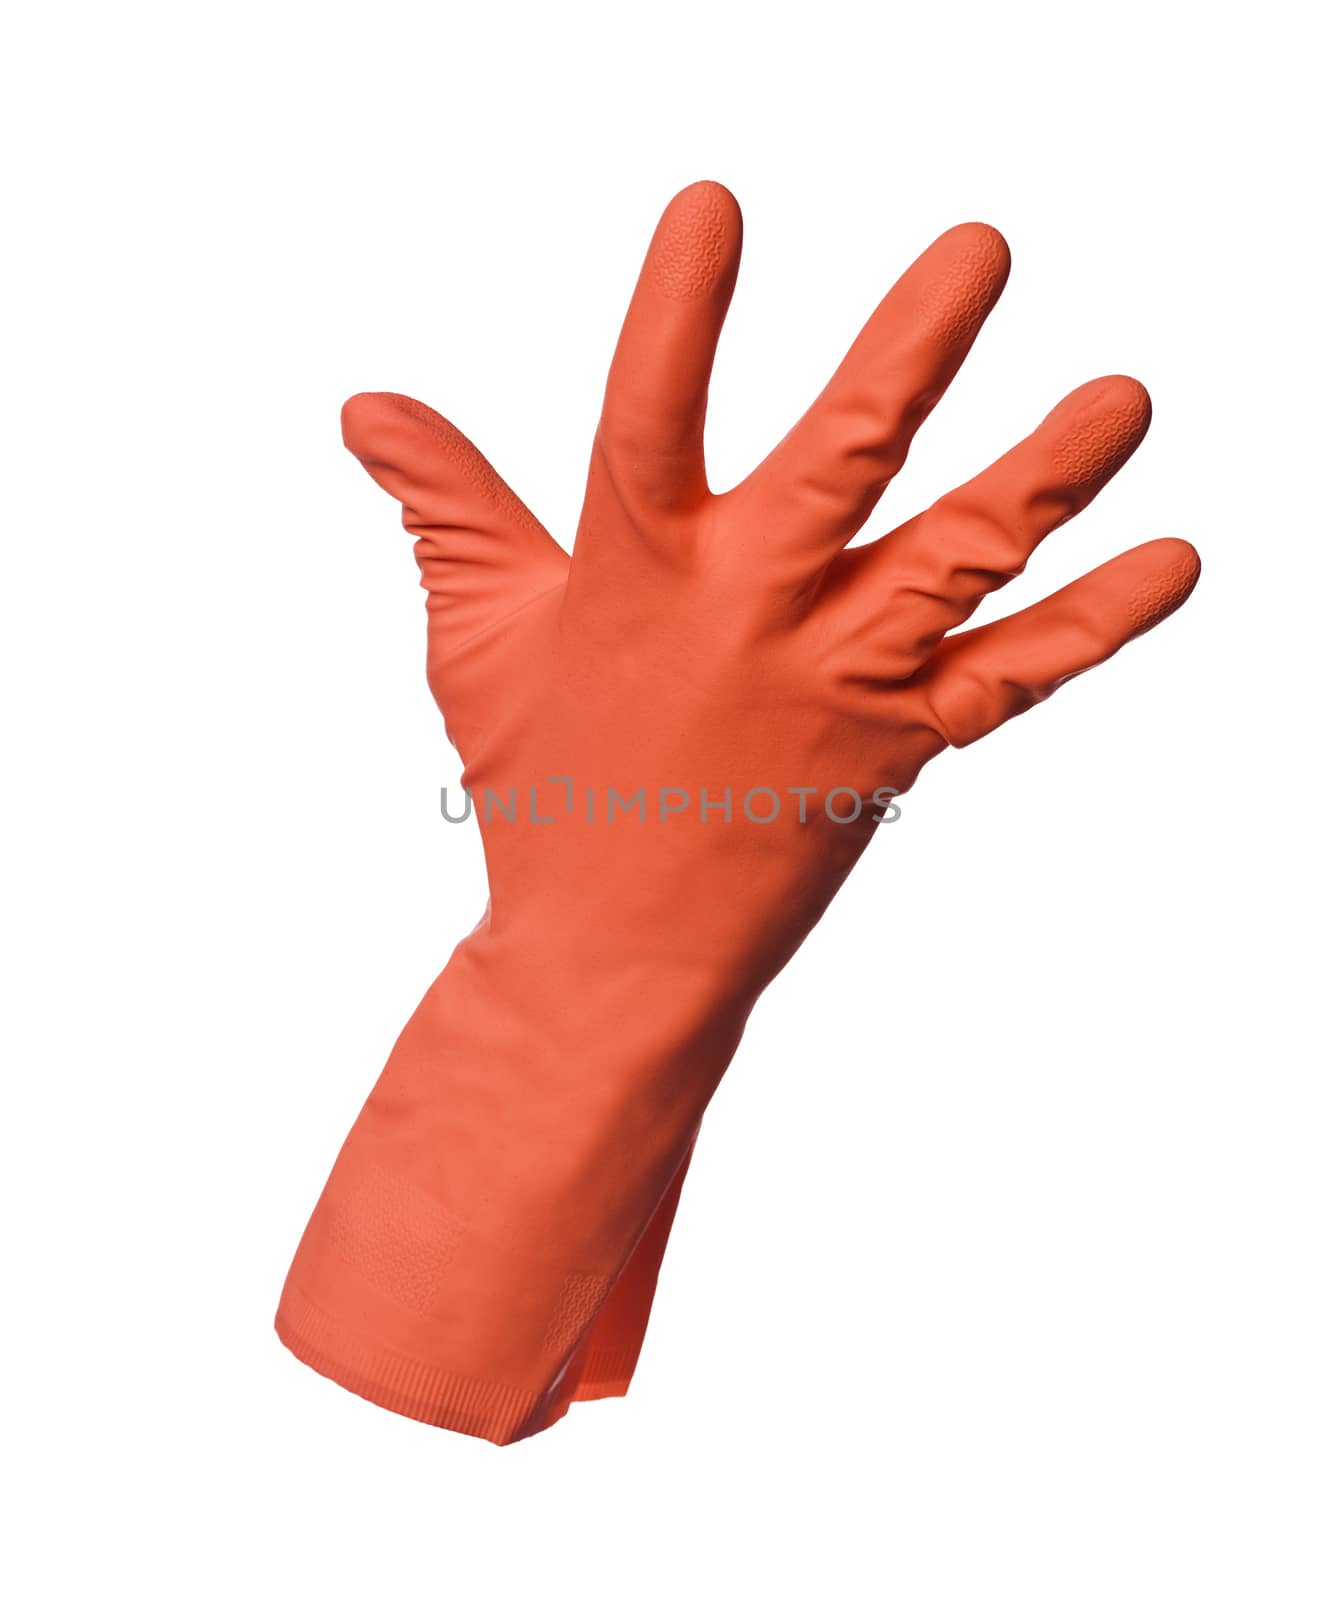 Red protection glove isolated on white background